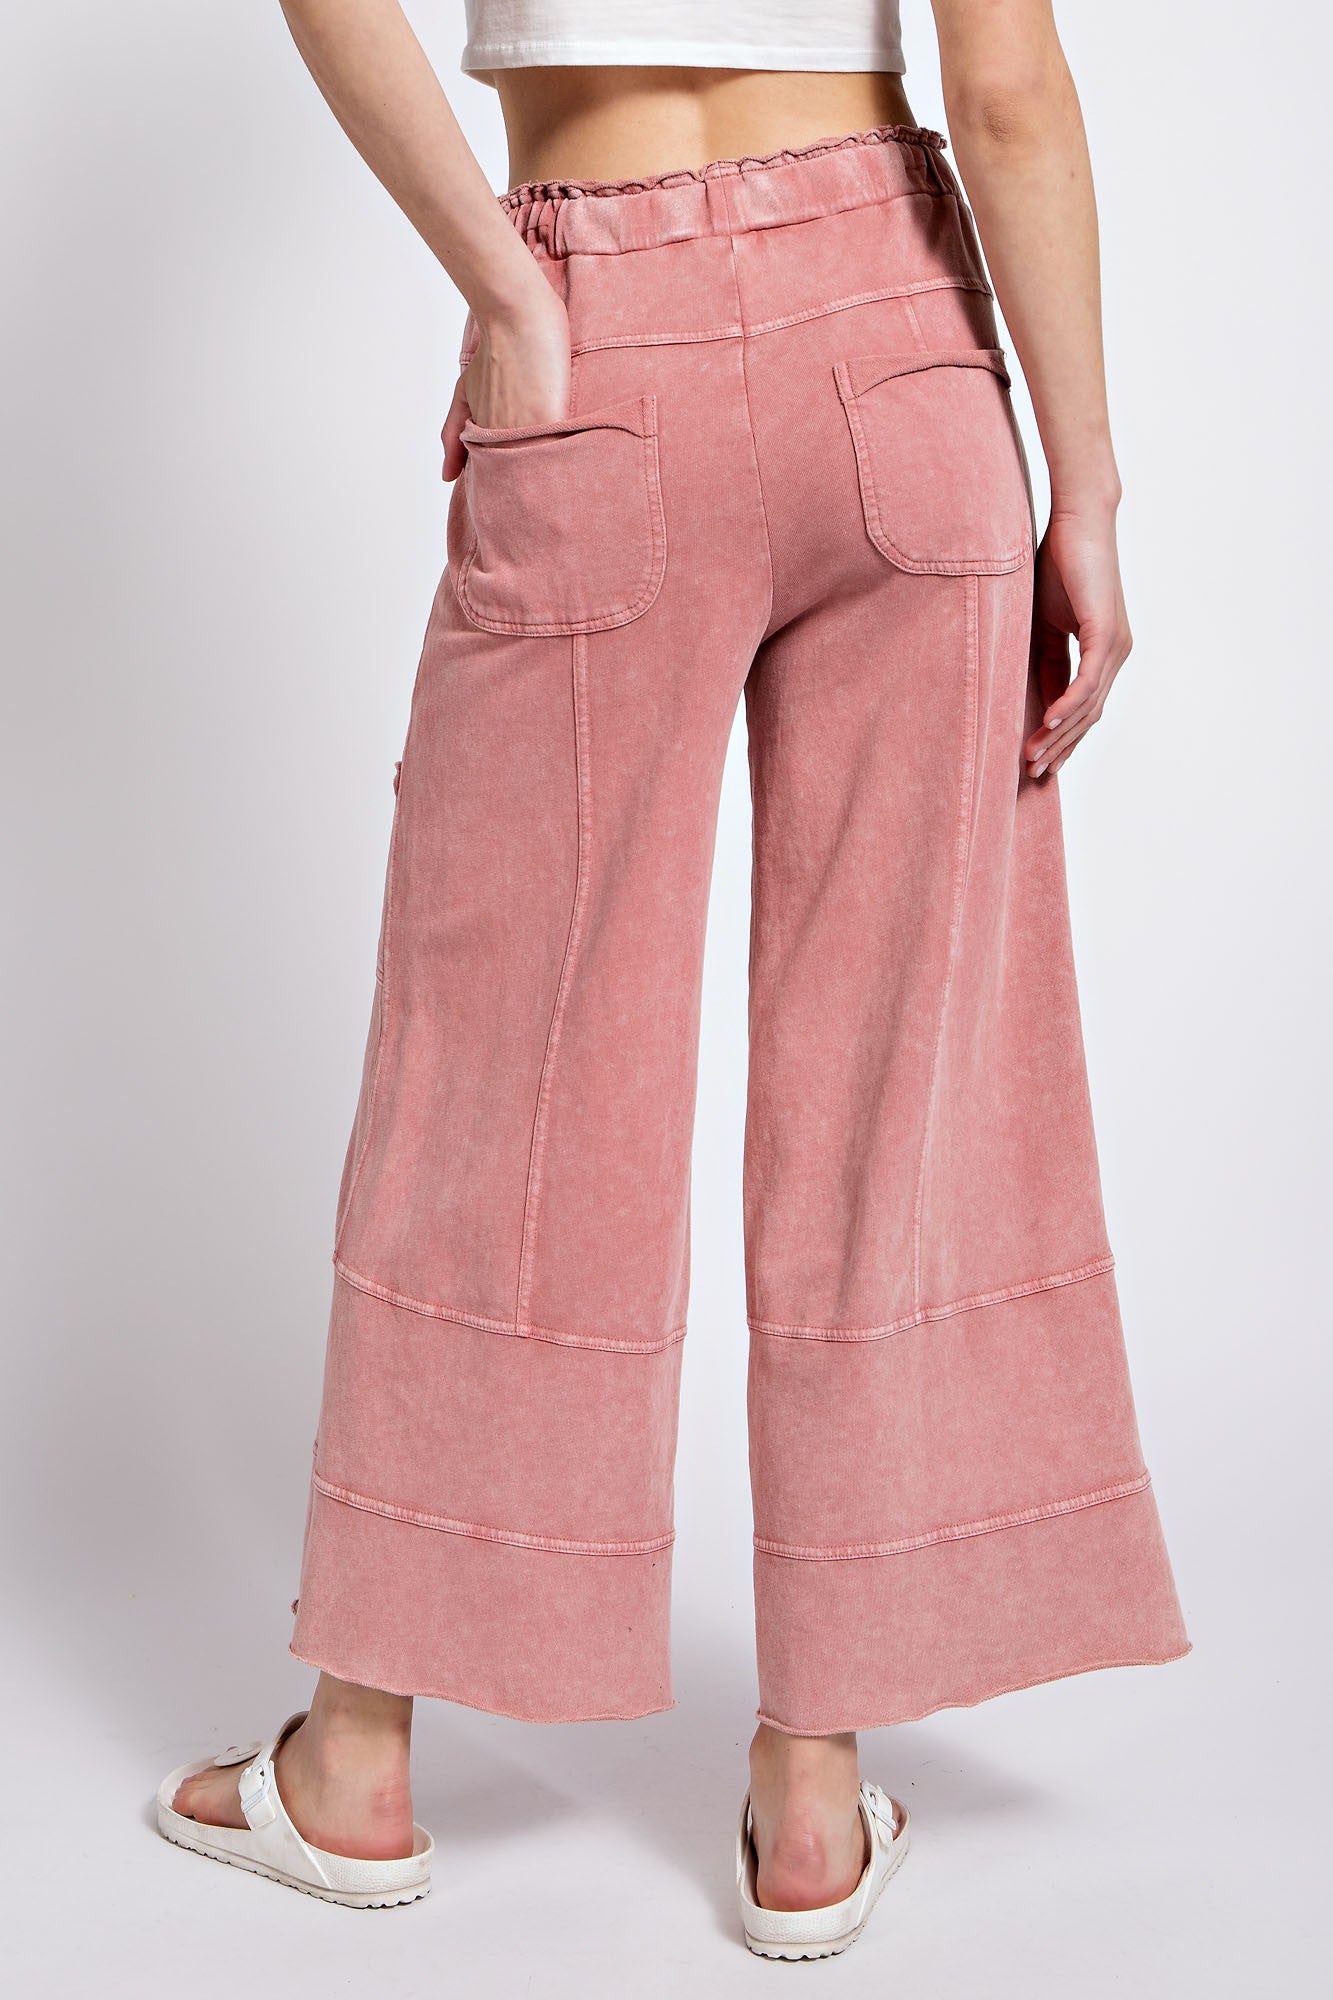 LADIES MINERAL WASHED TERRY KNIT PANTS - MAUVE